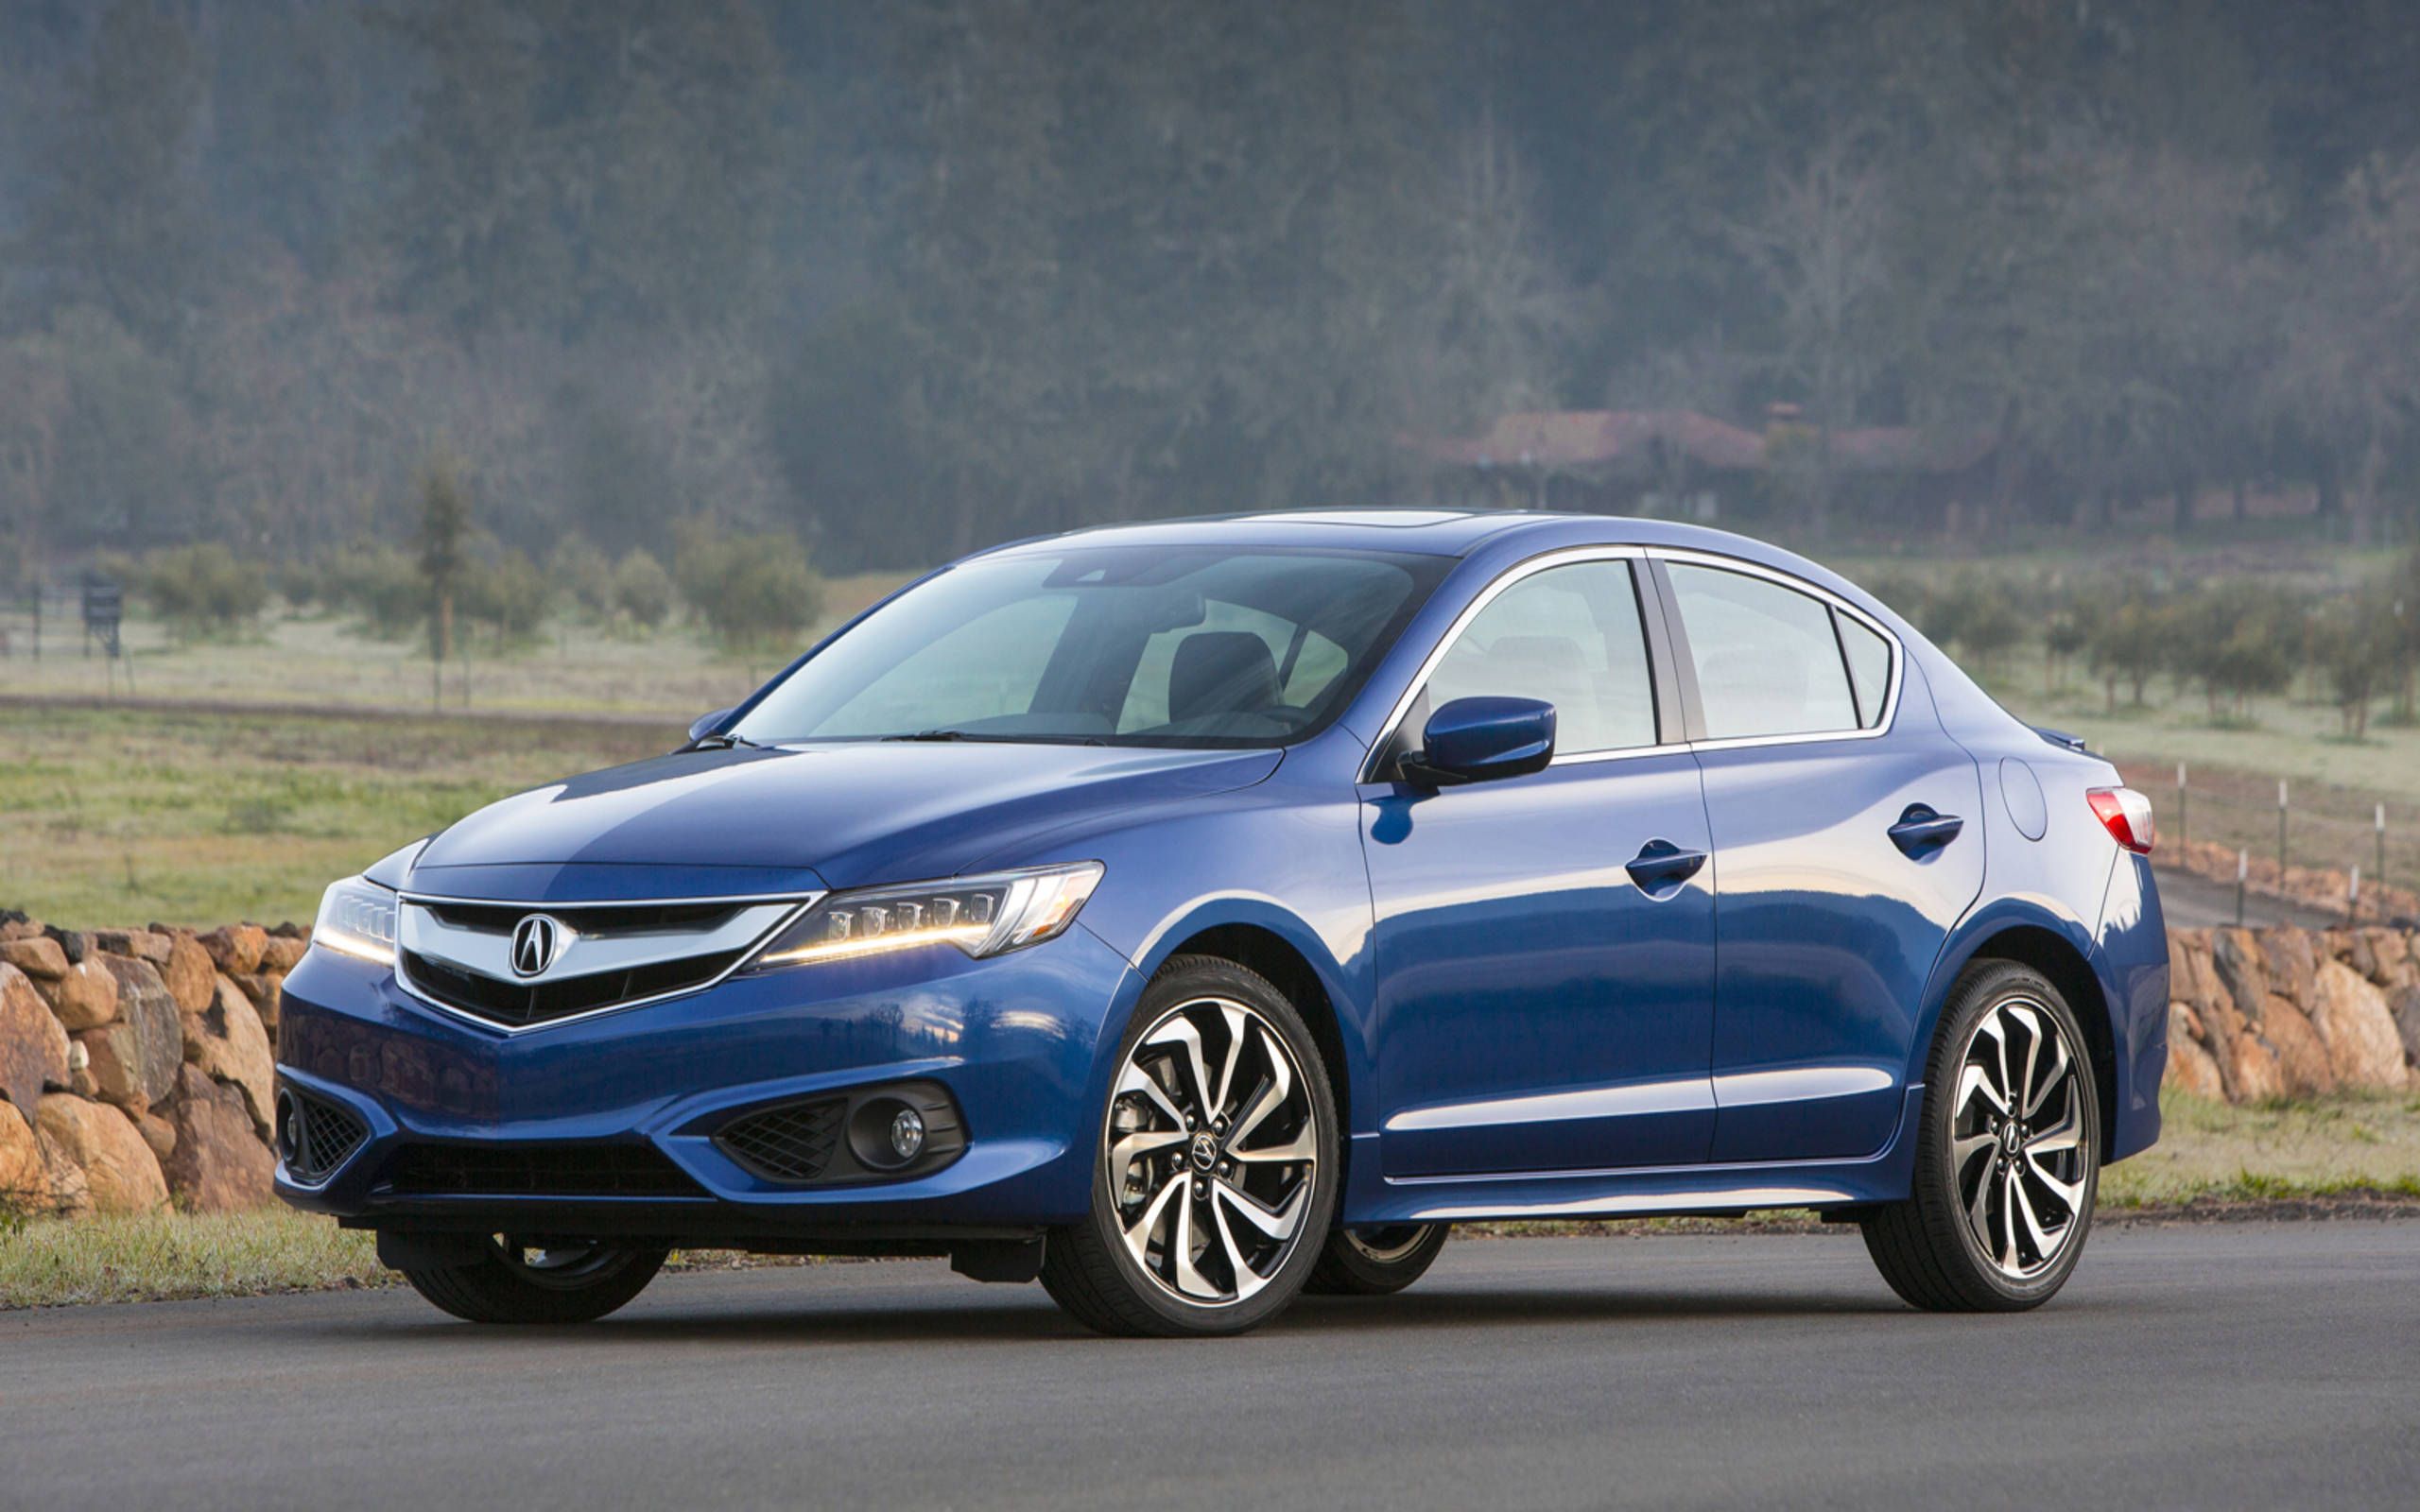 2017 Acura ILX review: Smoothed-out styling and a smooth dual clutch